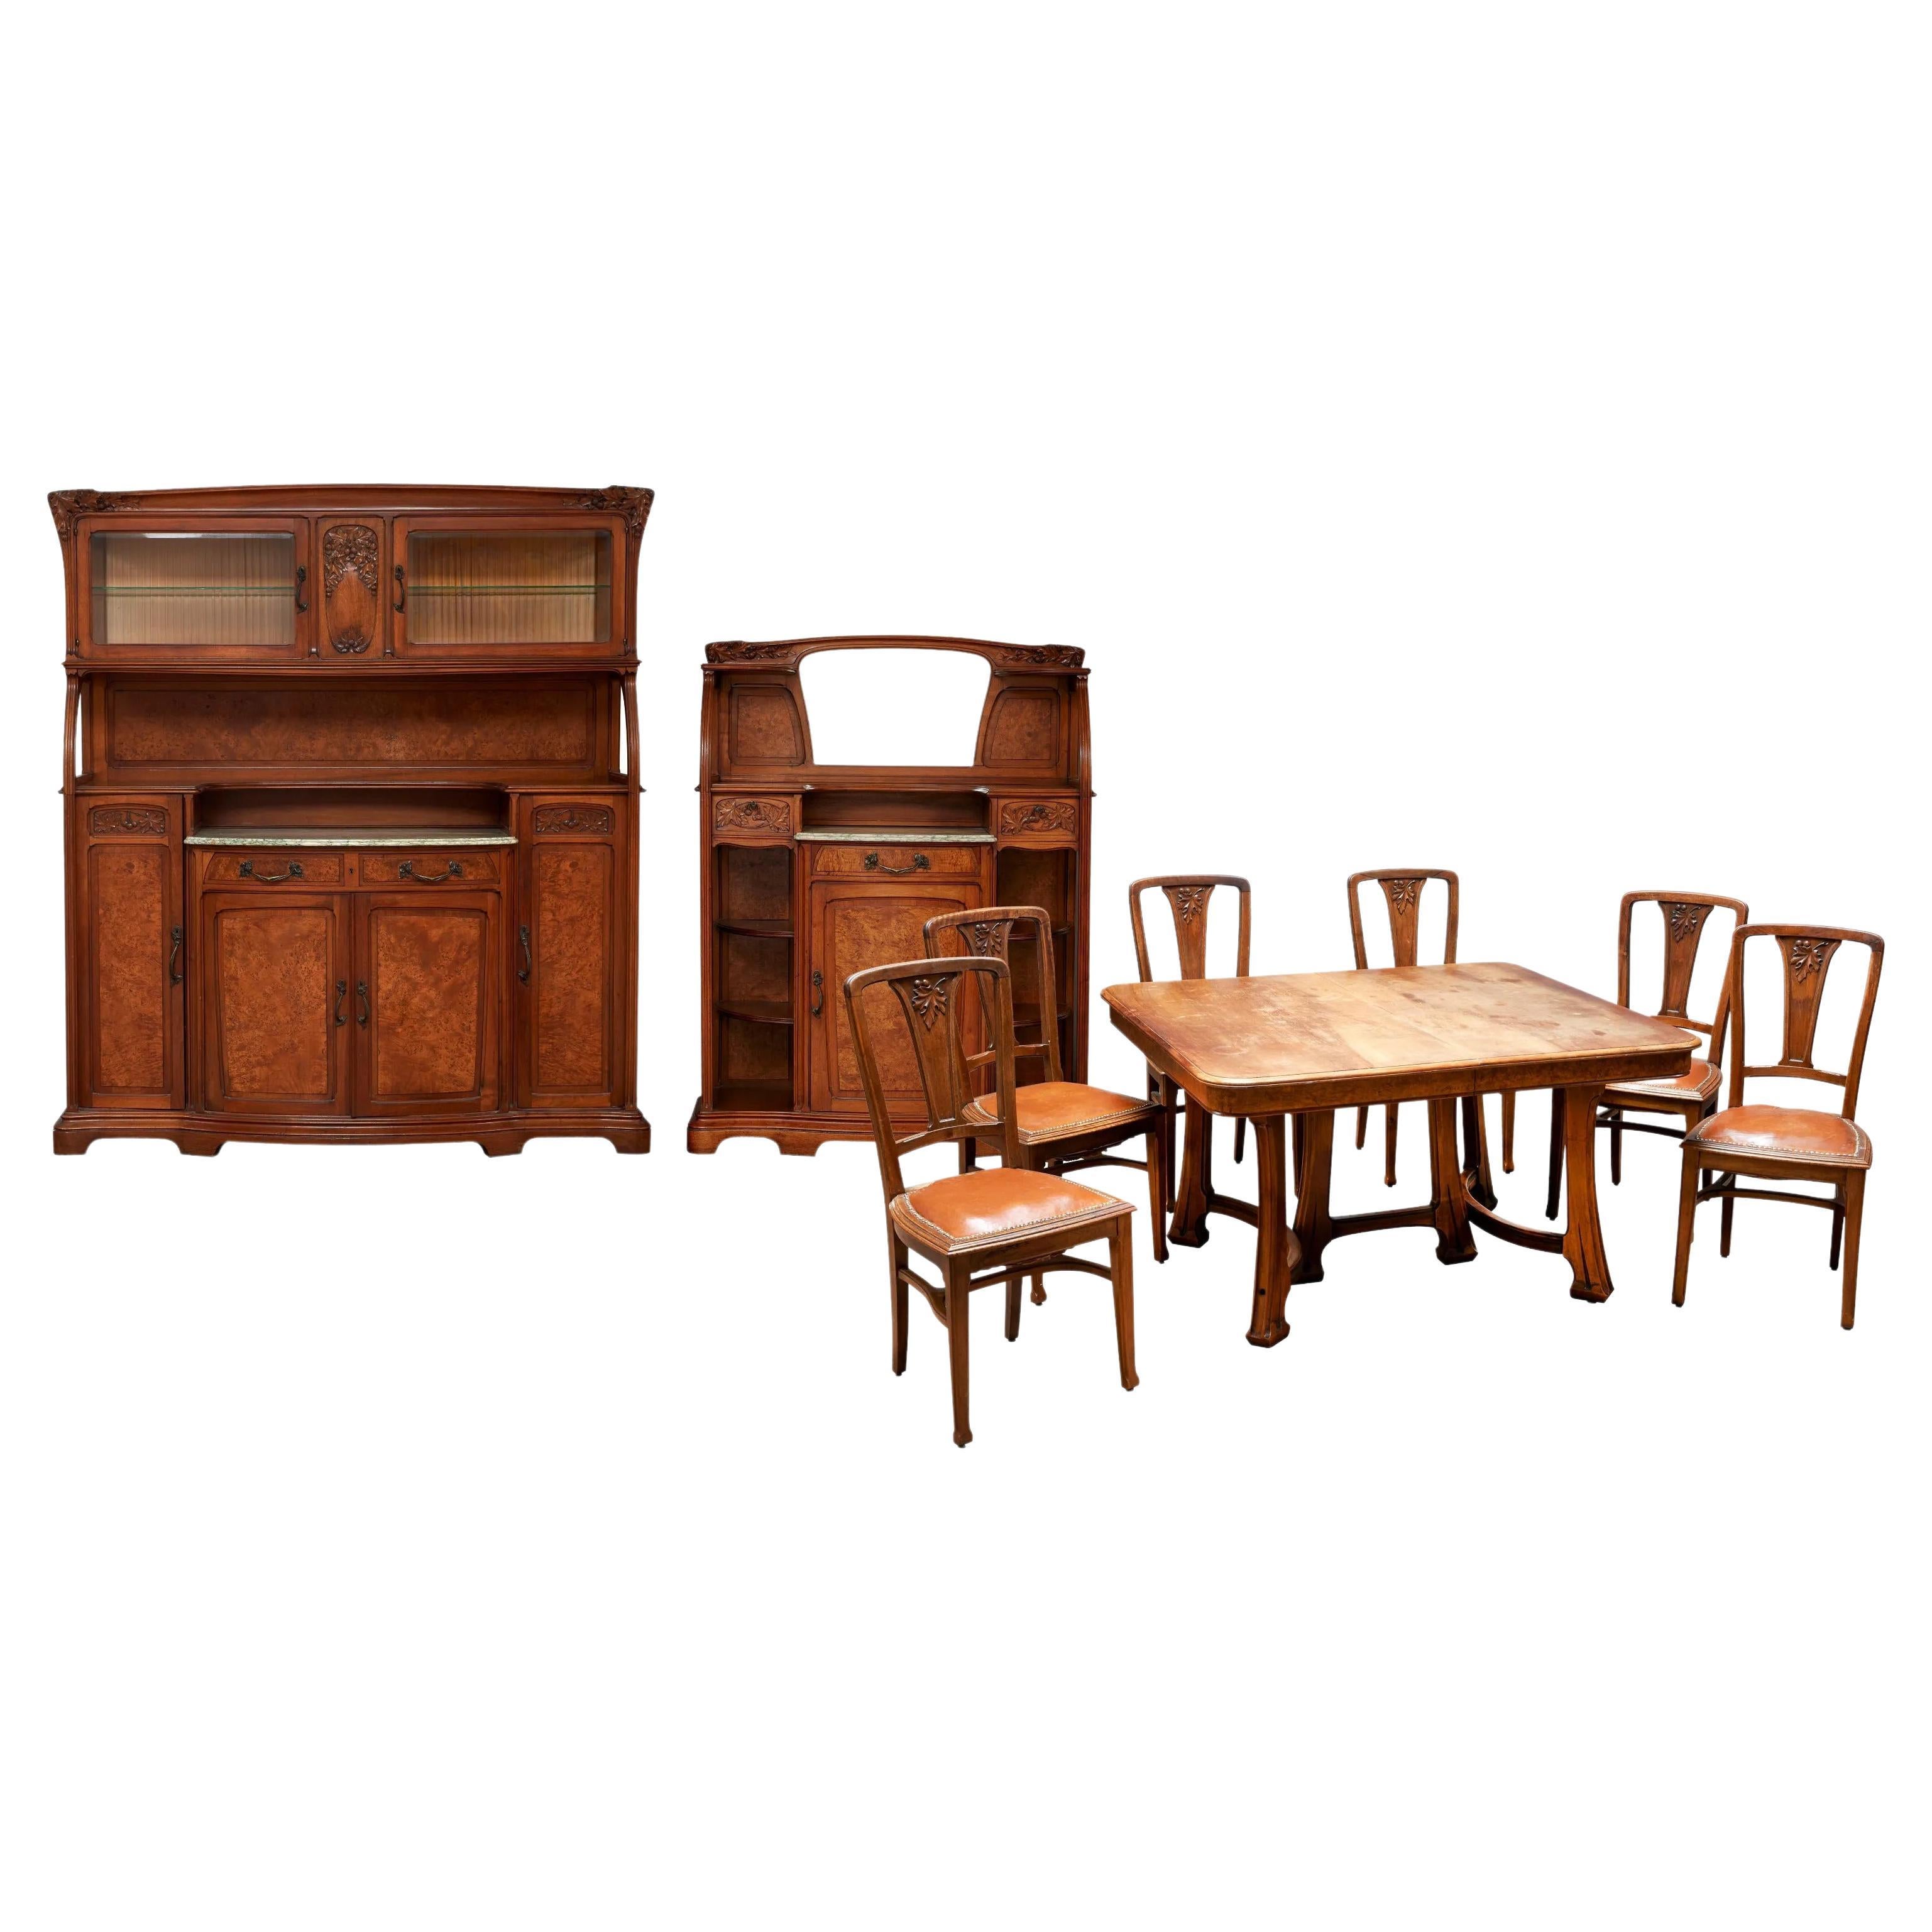 Gauthier-Poinsignon and Cie, Art Nouveau Dining Room Furniture in Walnut  and Elm For Sale at 1stDibs